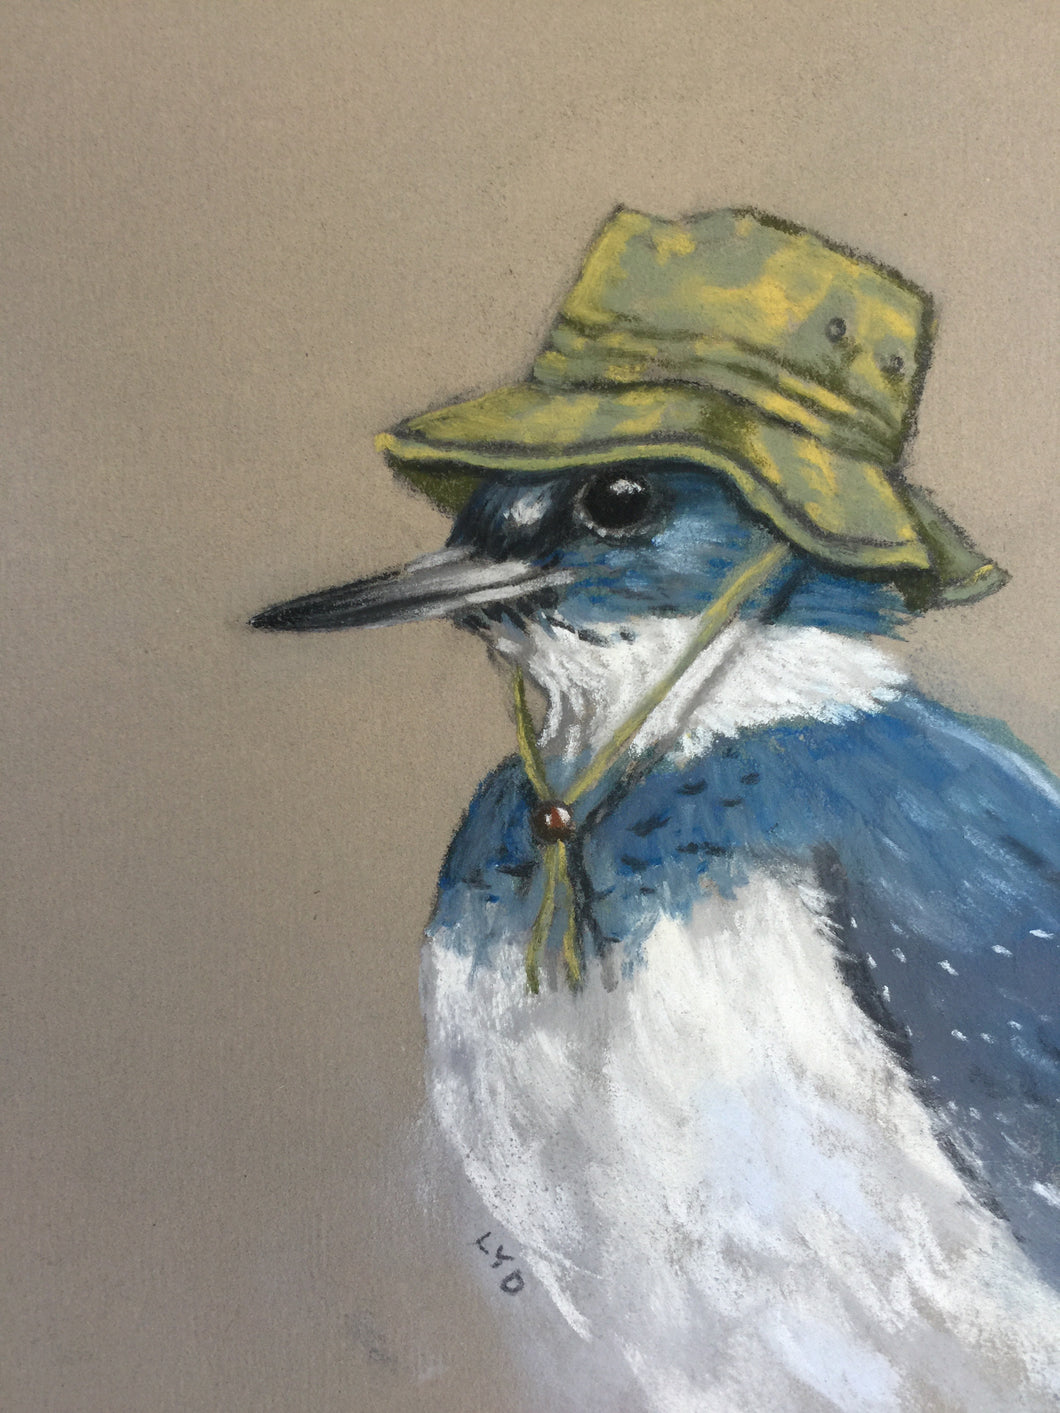 Belted Kingfisher in a Fishing Hat